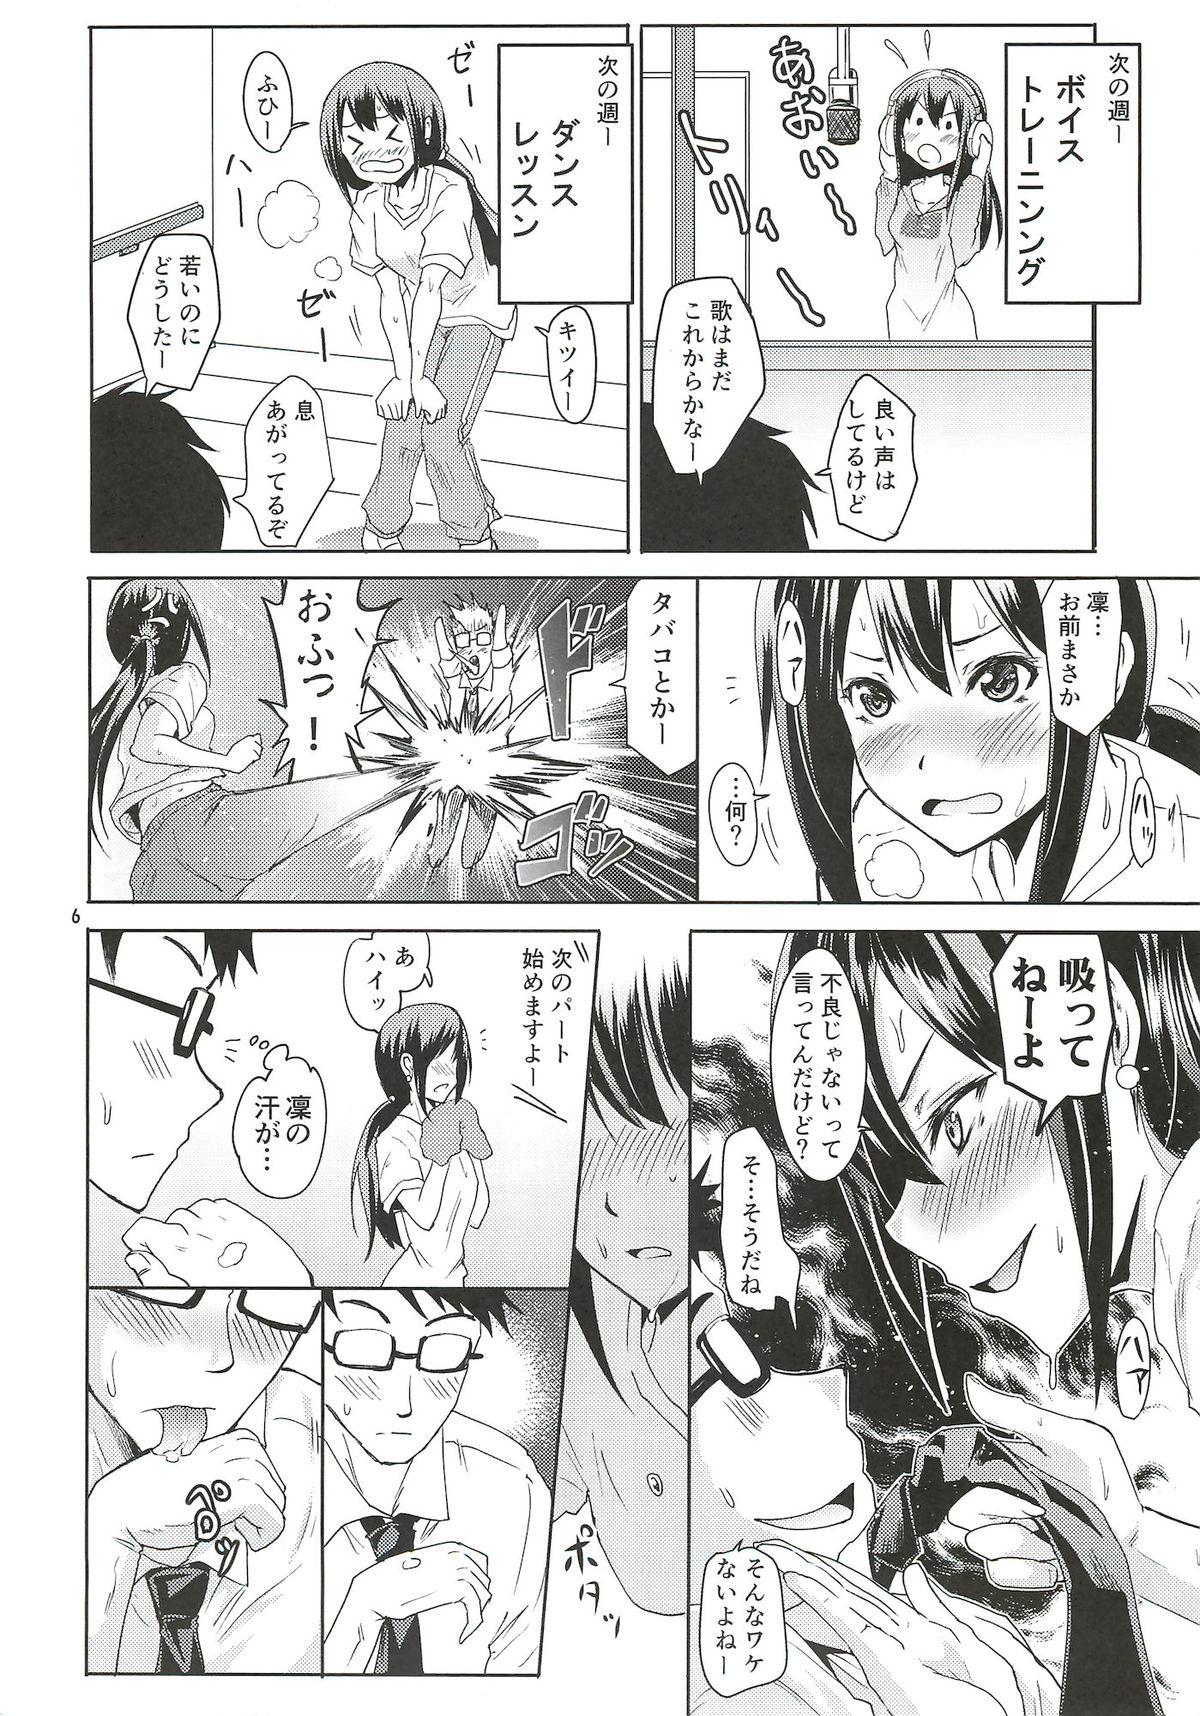 Phat Ass Shibuya no Rin-chan Now! - The idolmaster Reverse - Page 5